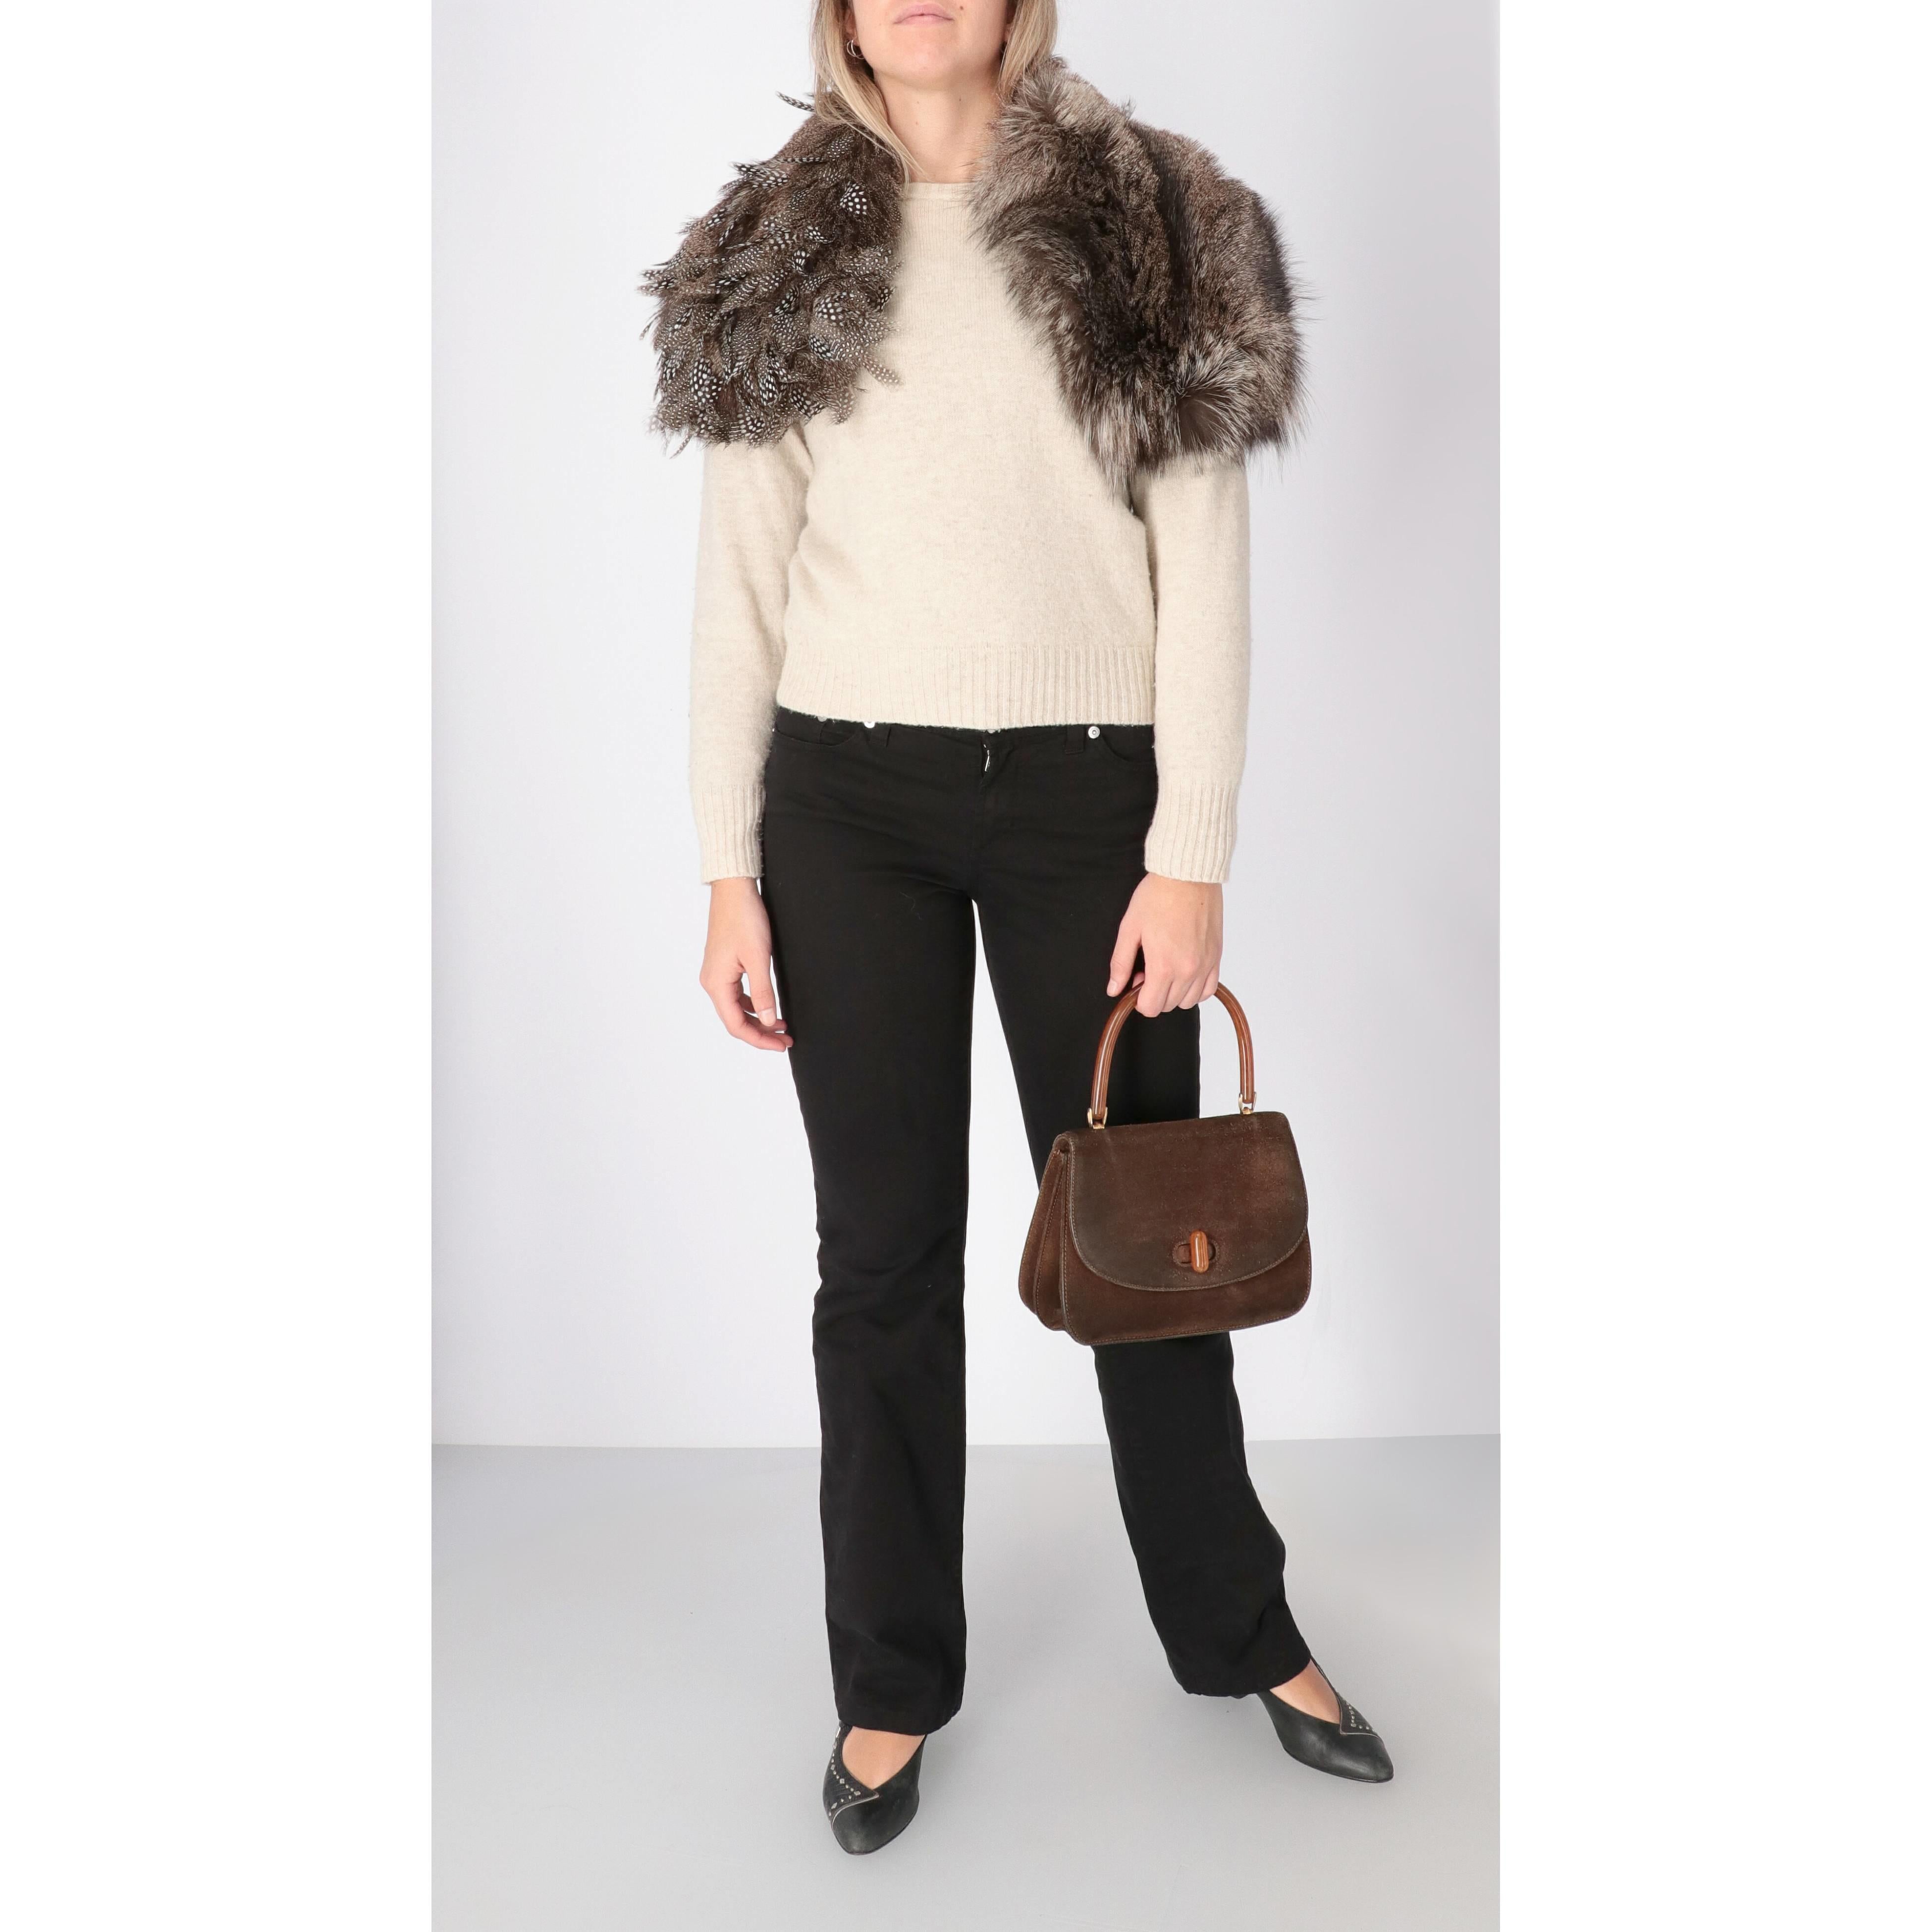 Gianfranco Ferré collar in real silver fox fur and black feathers with white polka dots. Lined in white fabric with black stripes.

Please note this item cannot be shipped outside the European Union.

Years: 2000s

Made in Italy

Measurements: